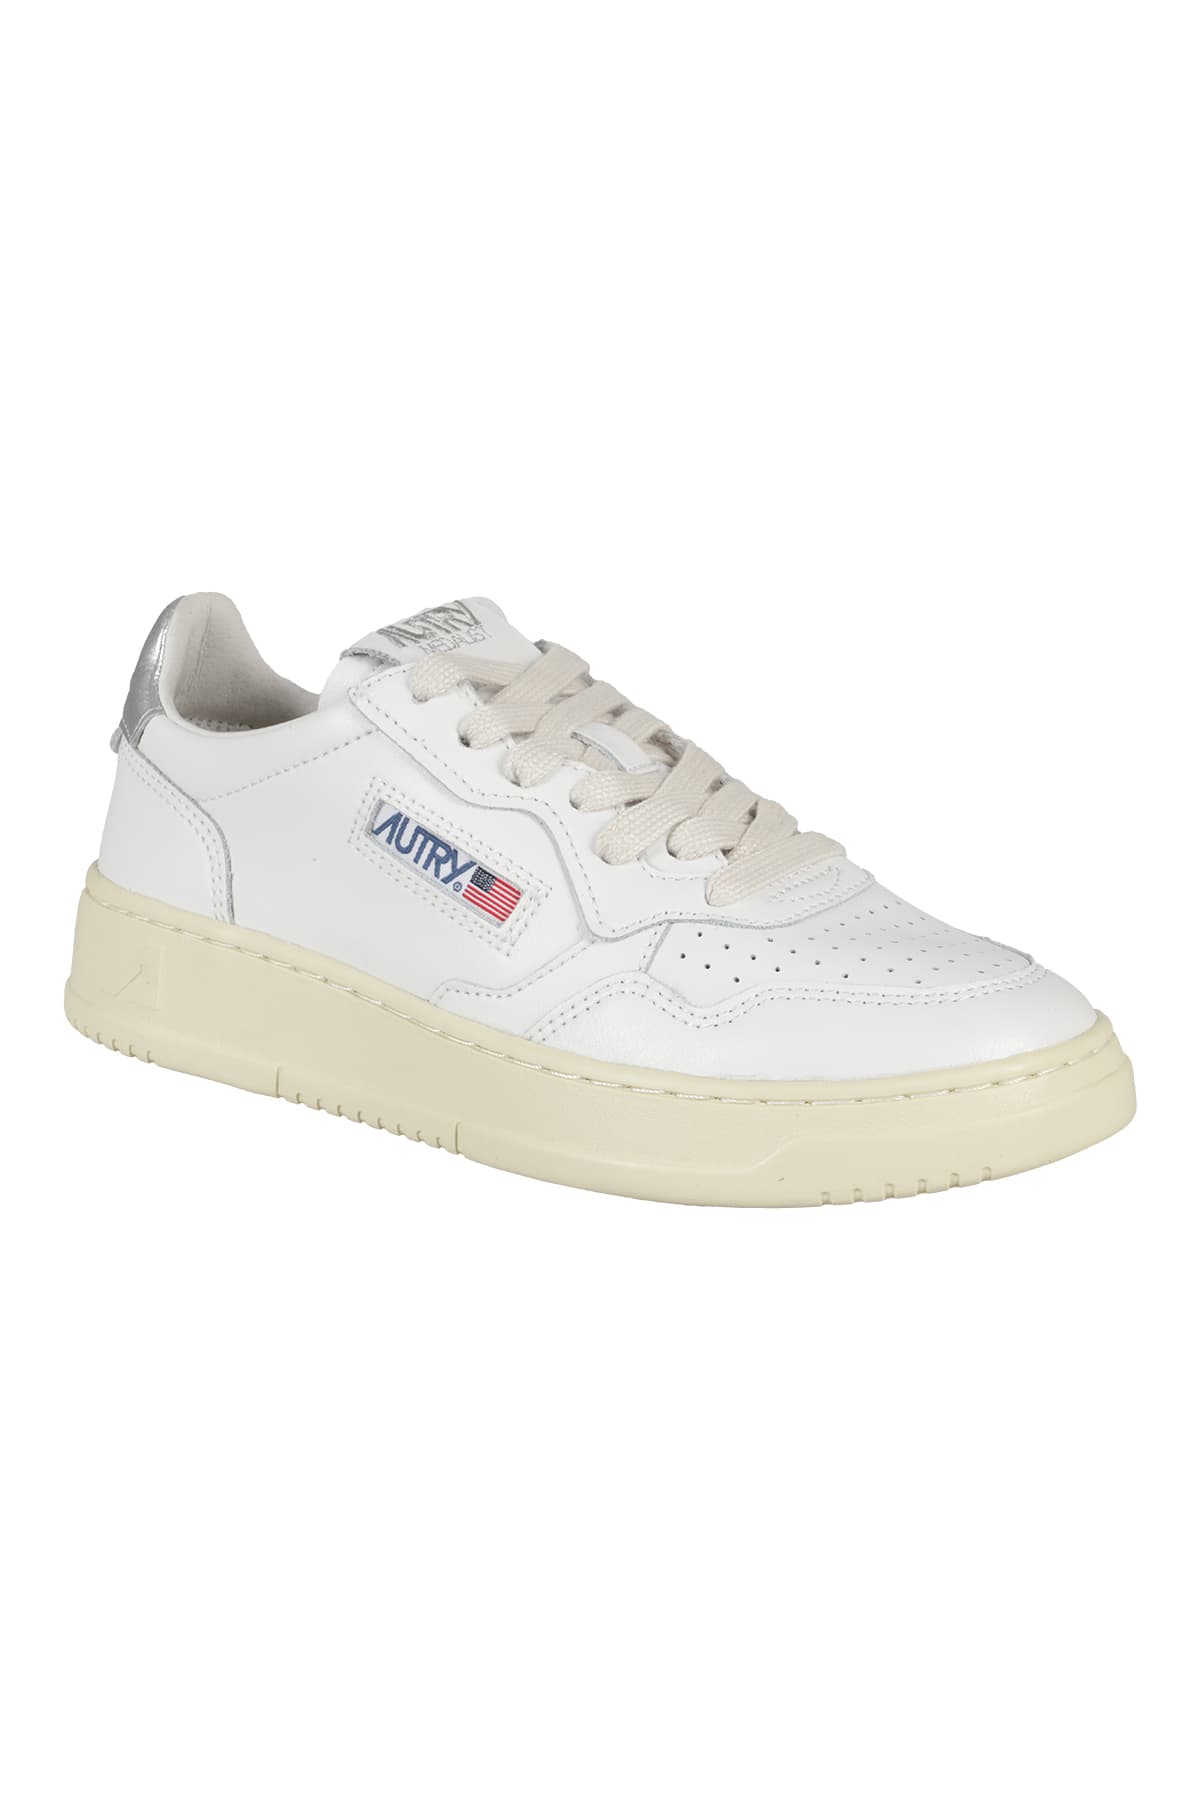 Shop Autry Medalist Low Wom In White Silver